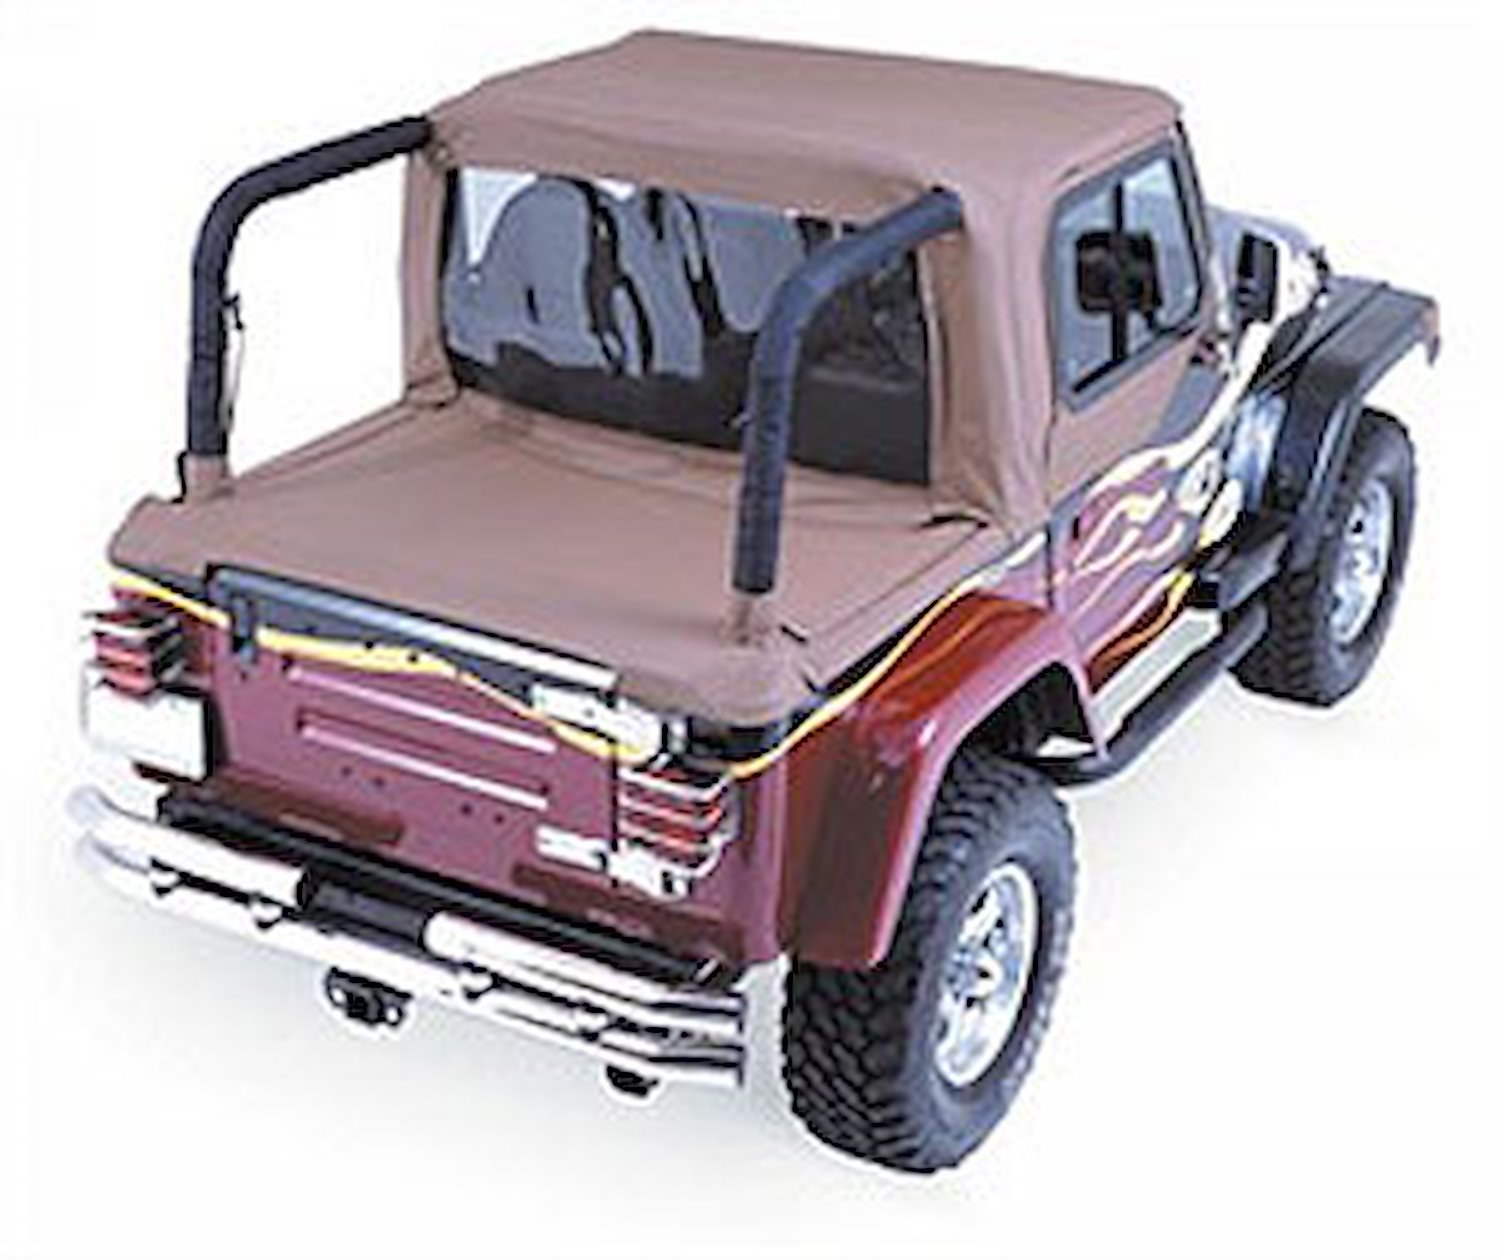 CAB TOP 92-95 JEEP WRANGLER DENIM SPICE FOR SOFT TOP VEHICLES ONLYINCLUDES TONNEAU COVER